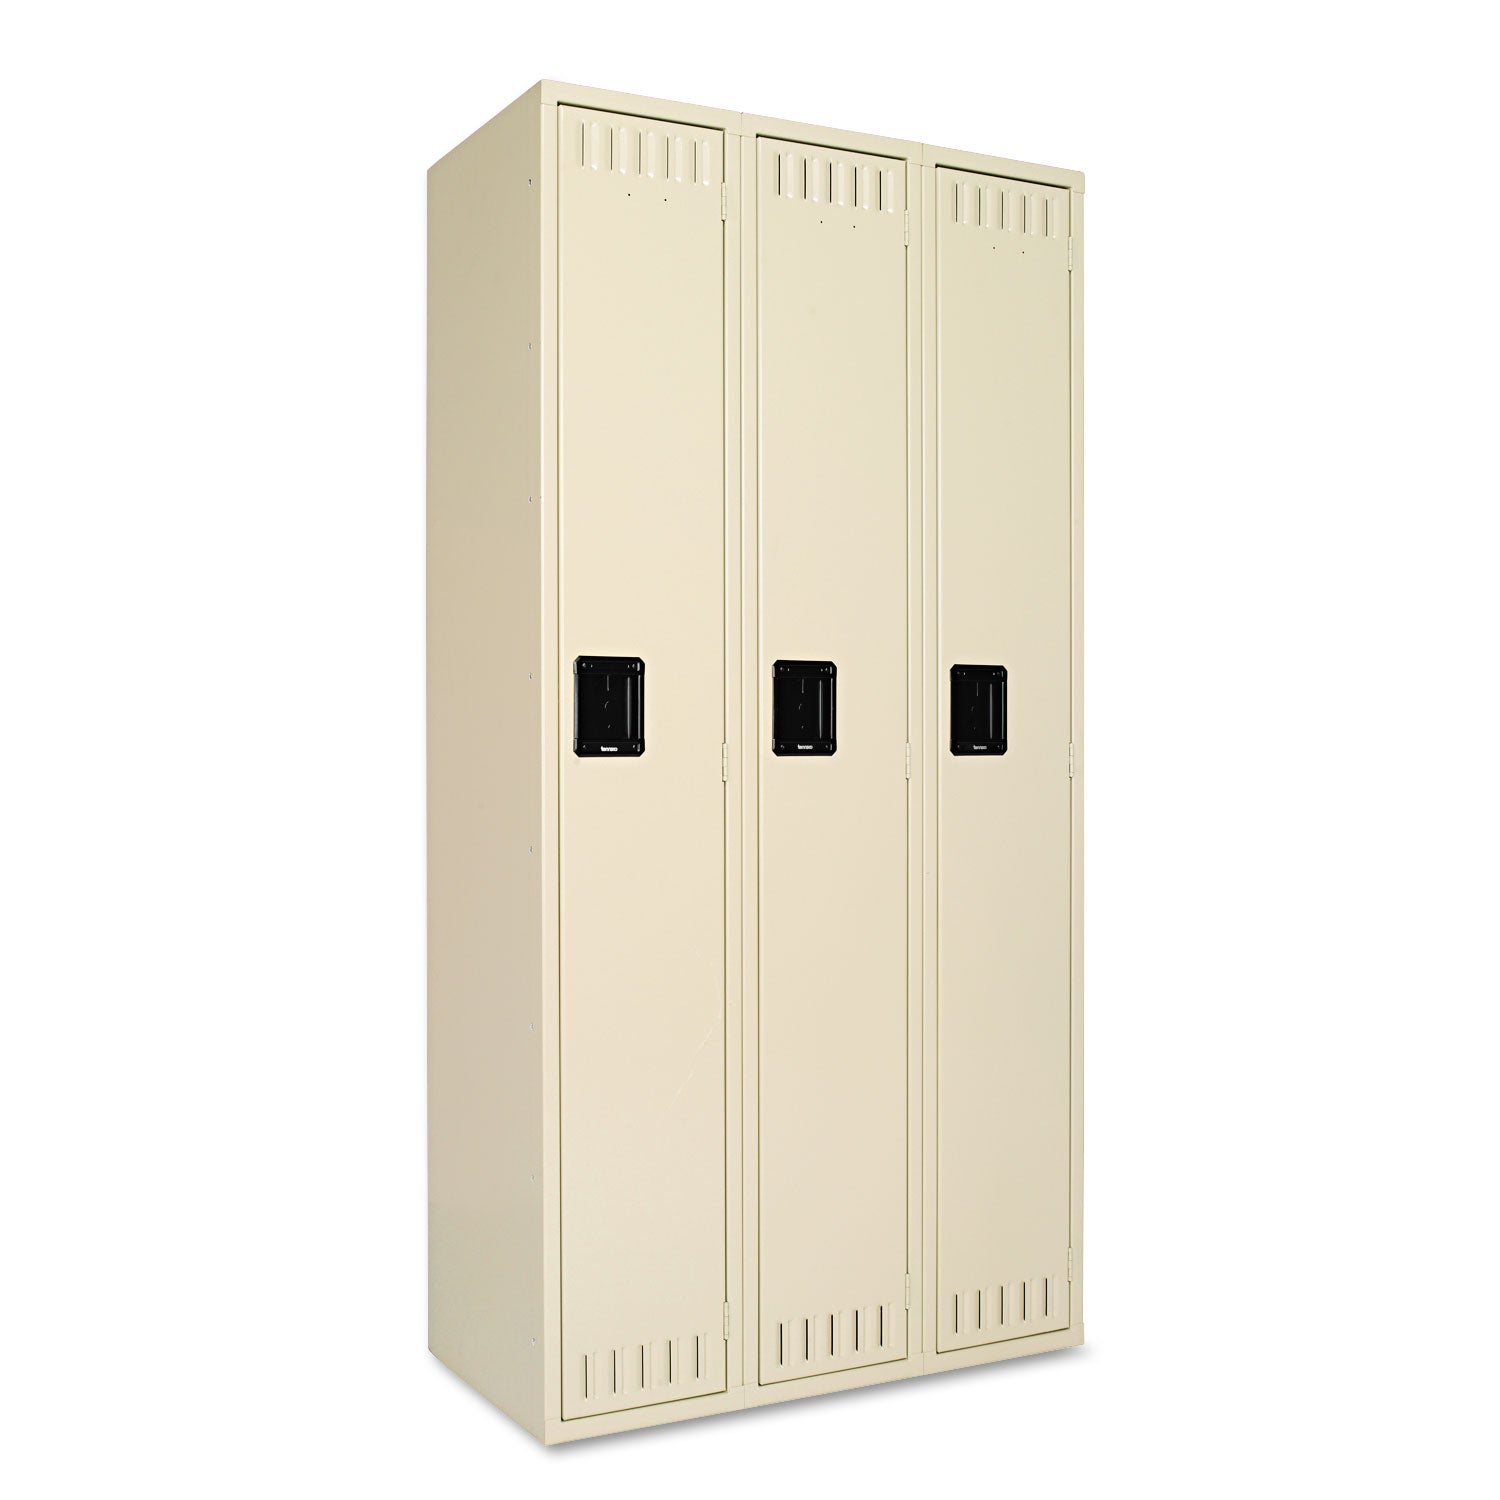 Single-Tier Locker, Three Lockers with Hat Shelves and Coat Rods, 36w x 18d x 72h, Sand - 